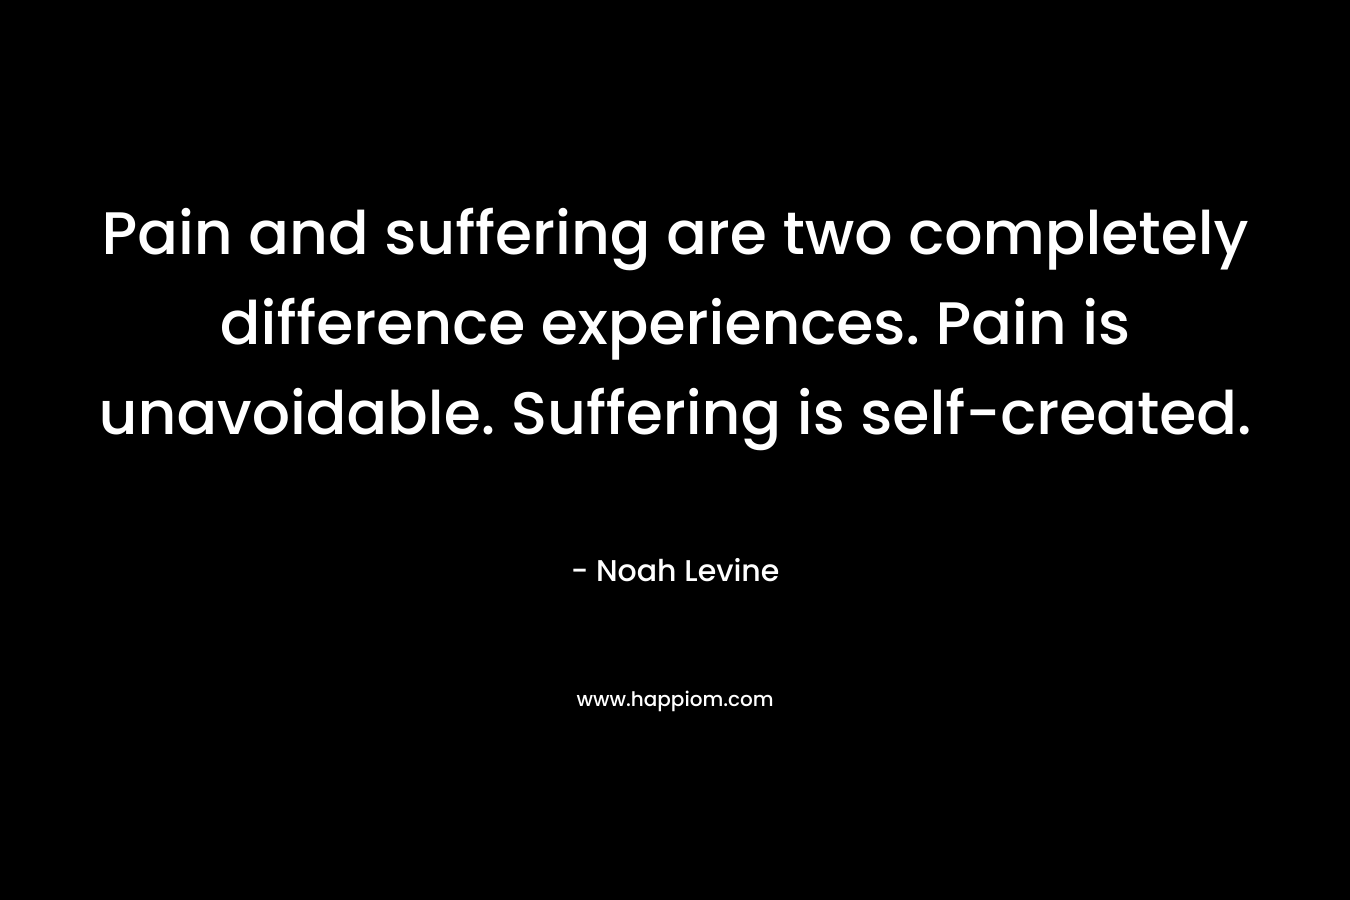 Pain and suffering are two completely difference experiences. Pain is unavoidable. Suffering is self-created.